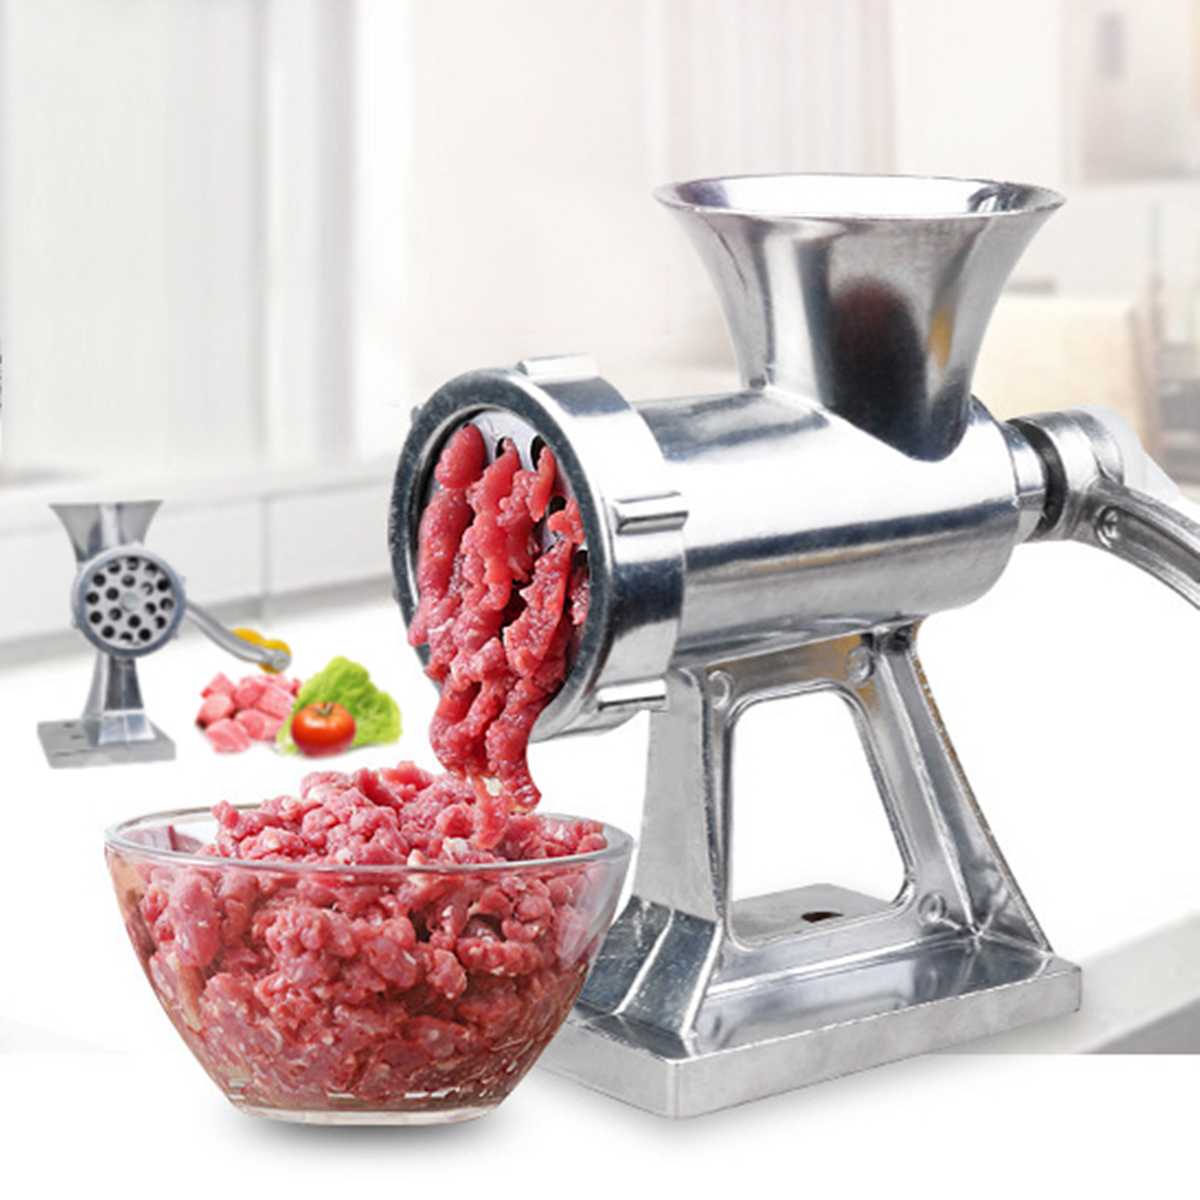 Manual Meat Grinders，Aluminum Alloy 6 in 1 Multi-Functional Home Kitchen Manual Meat Grinder for All Meats